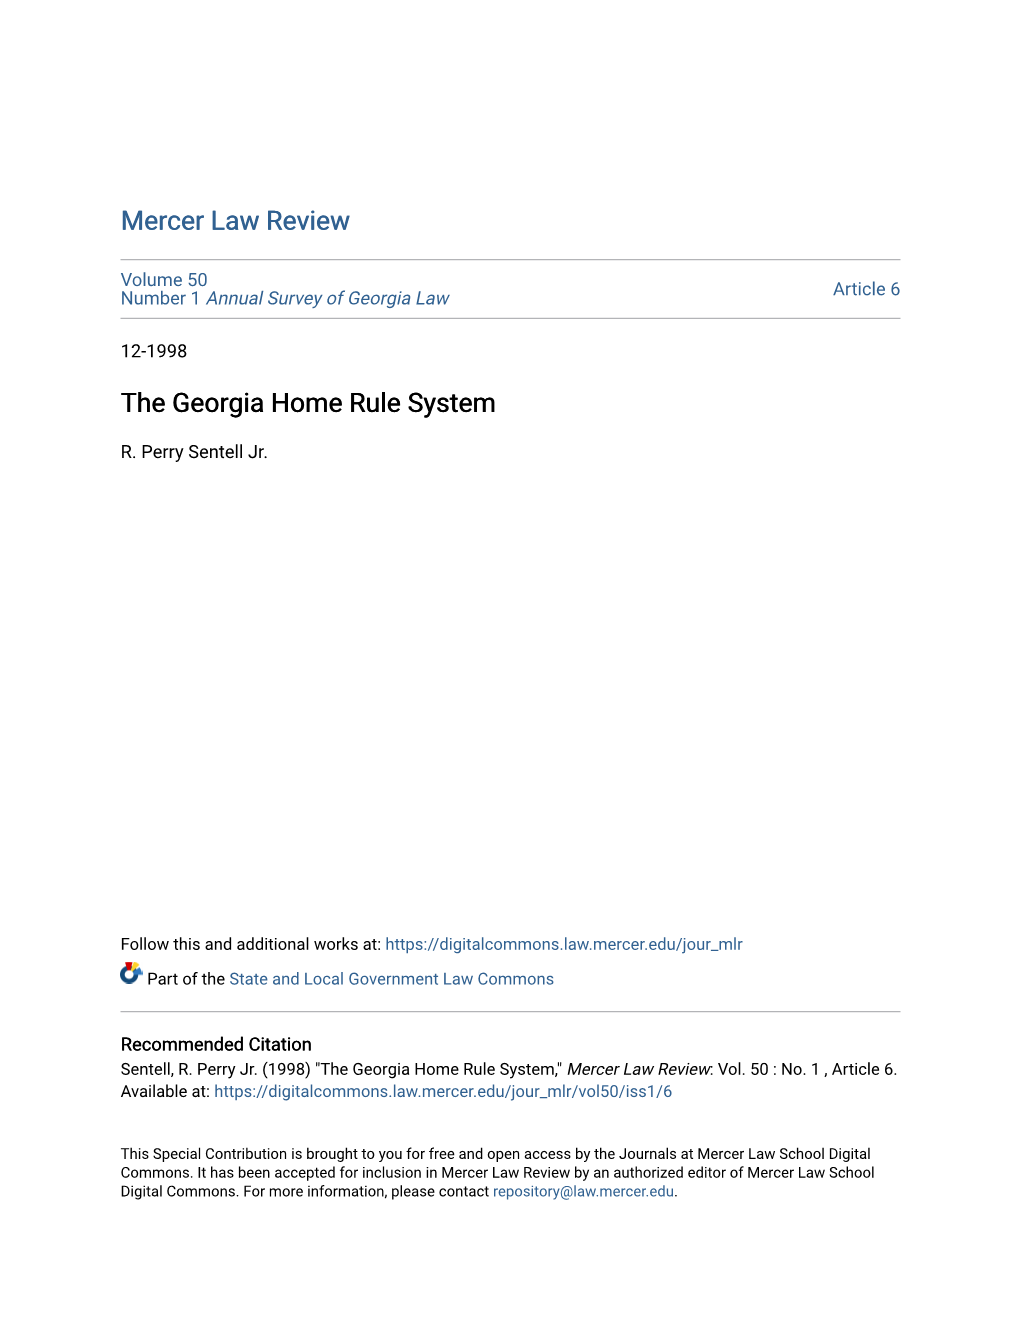 The Georgia Home Rule System